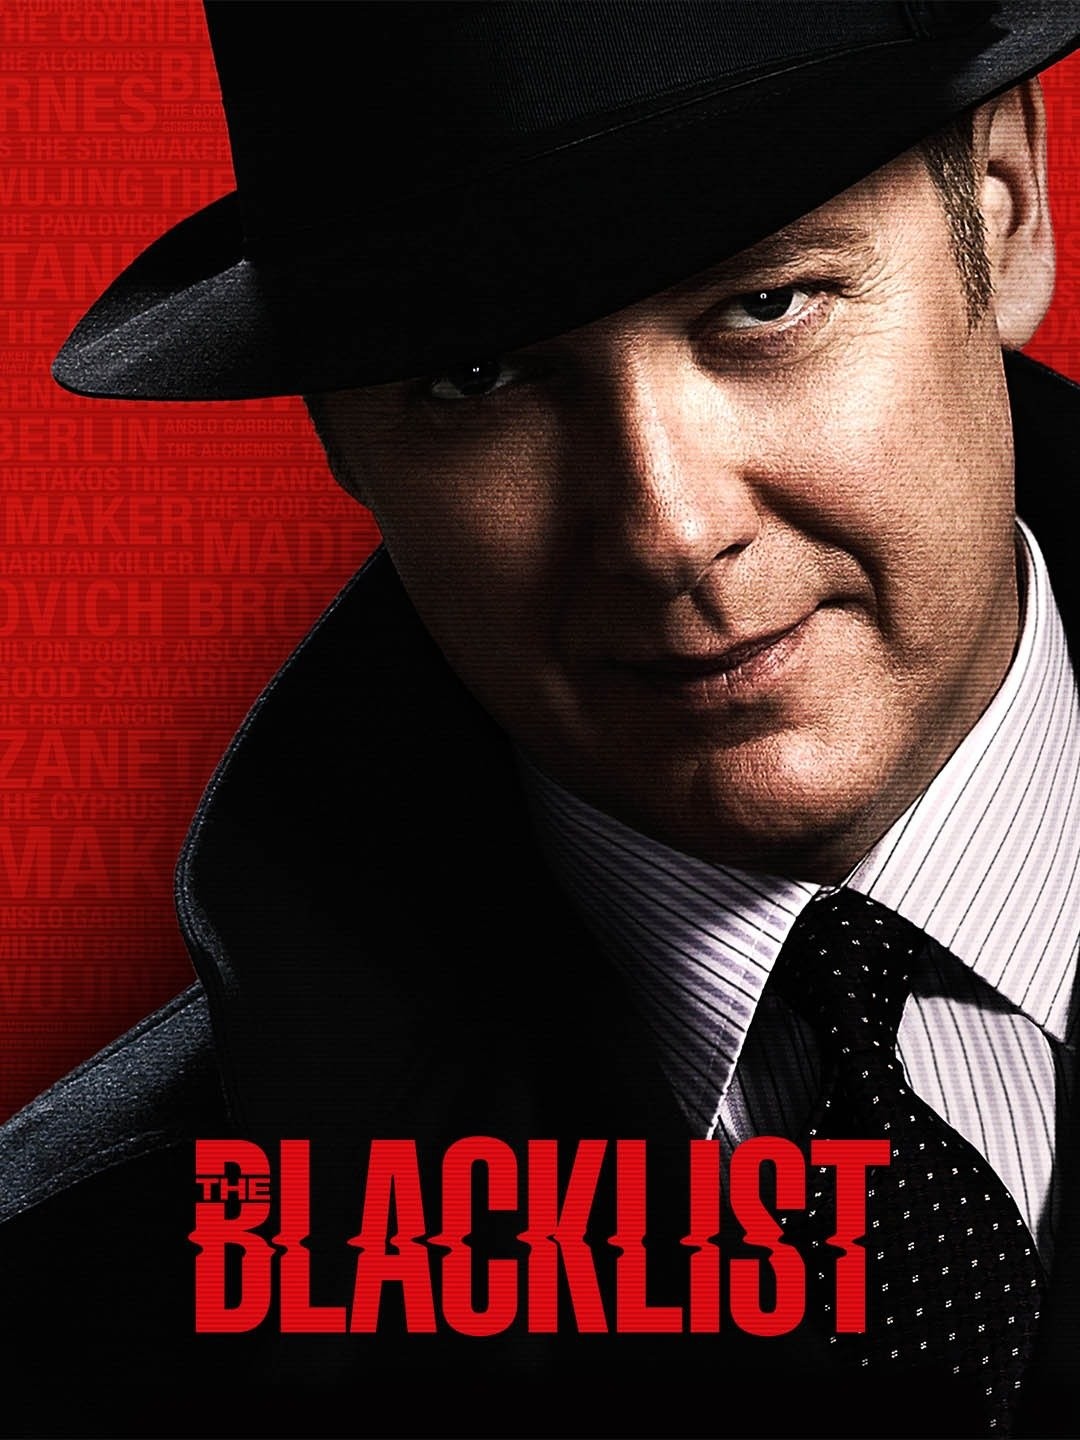 Blacklist International - Couldn't just quite close things out